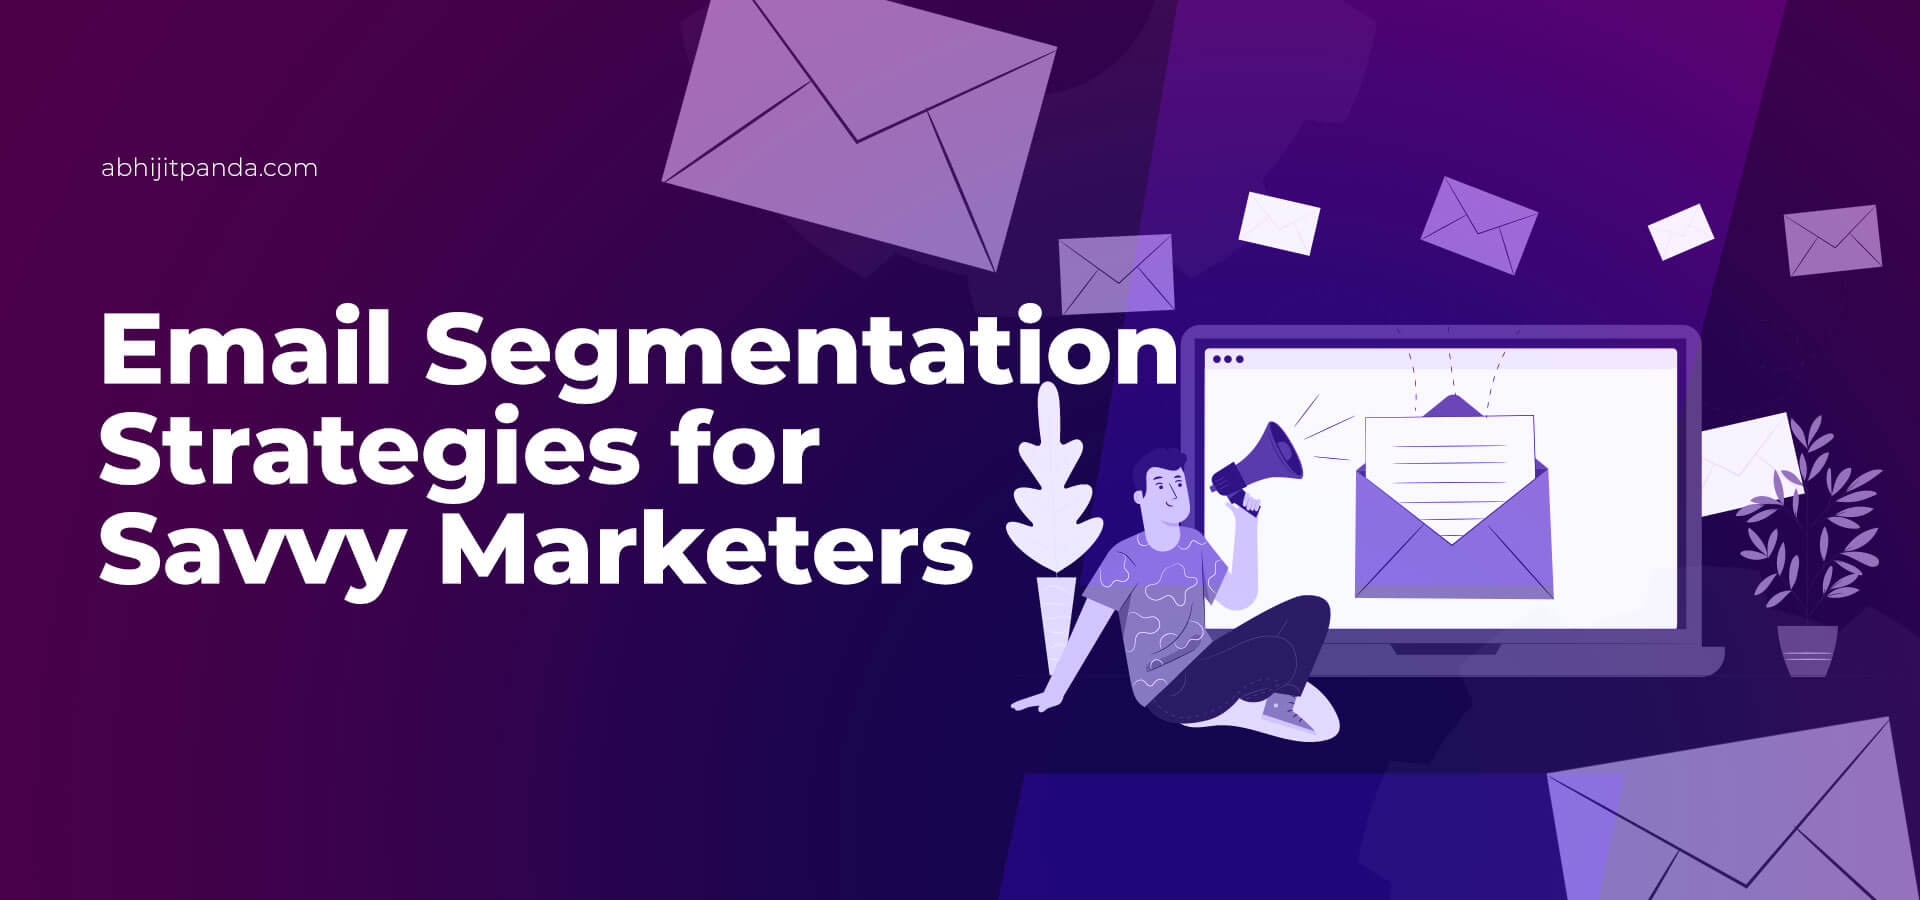 Email Segmentation Strategies for Savvy Marketers